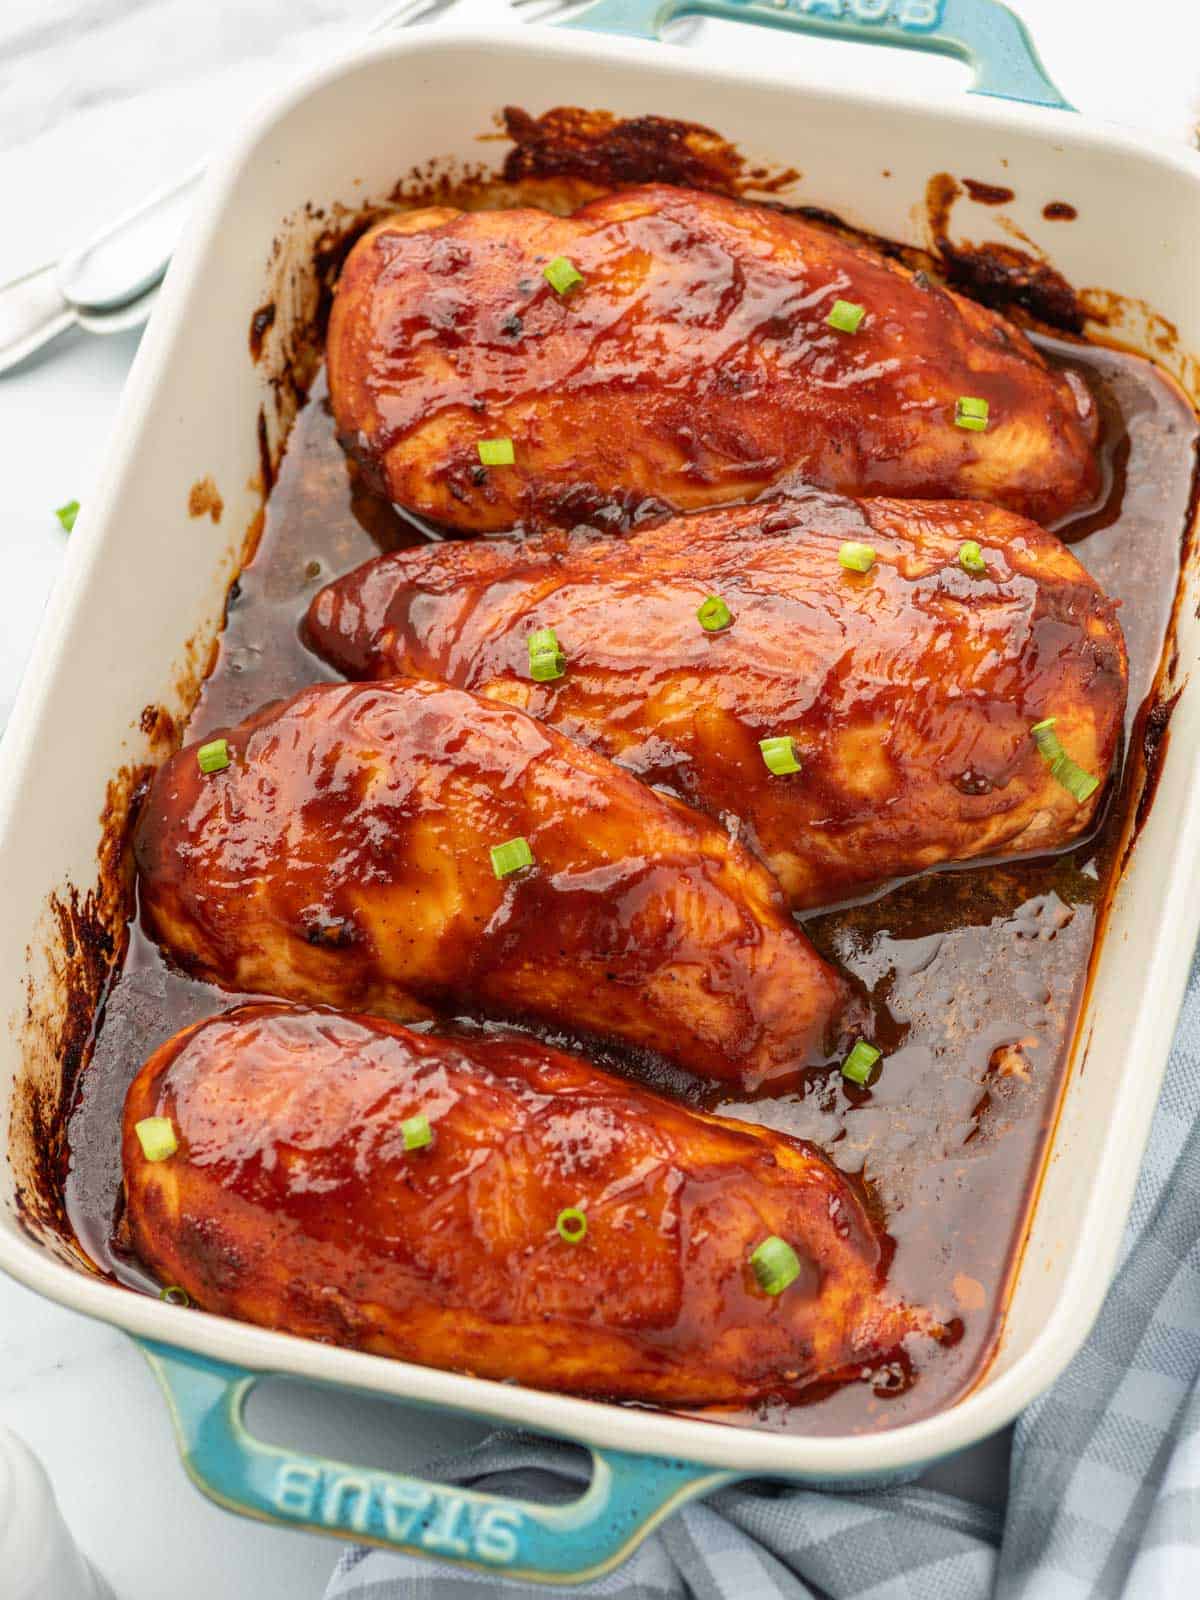 A casserole dish with 4 oven baked BBQ chicken breasts covered in sauce.